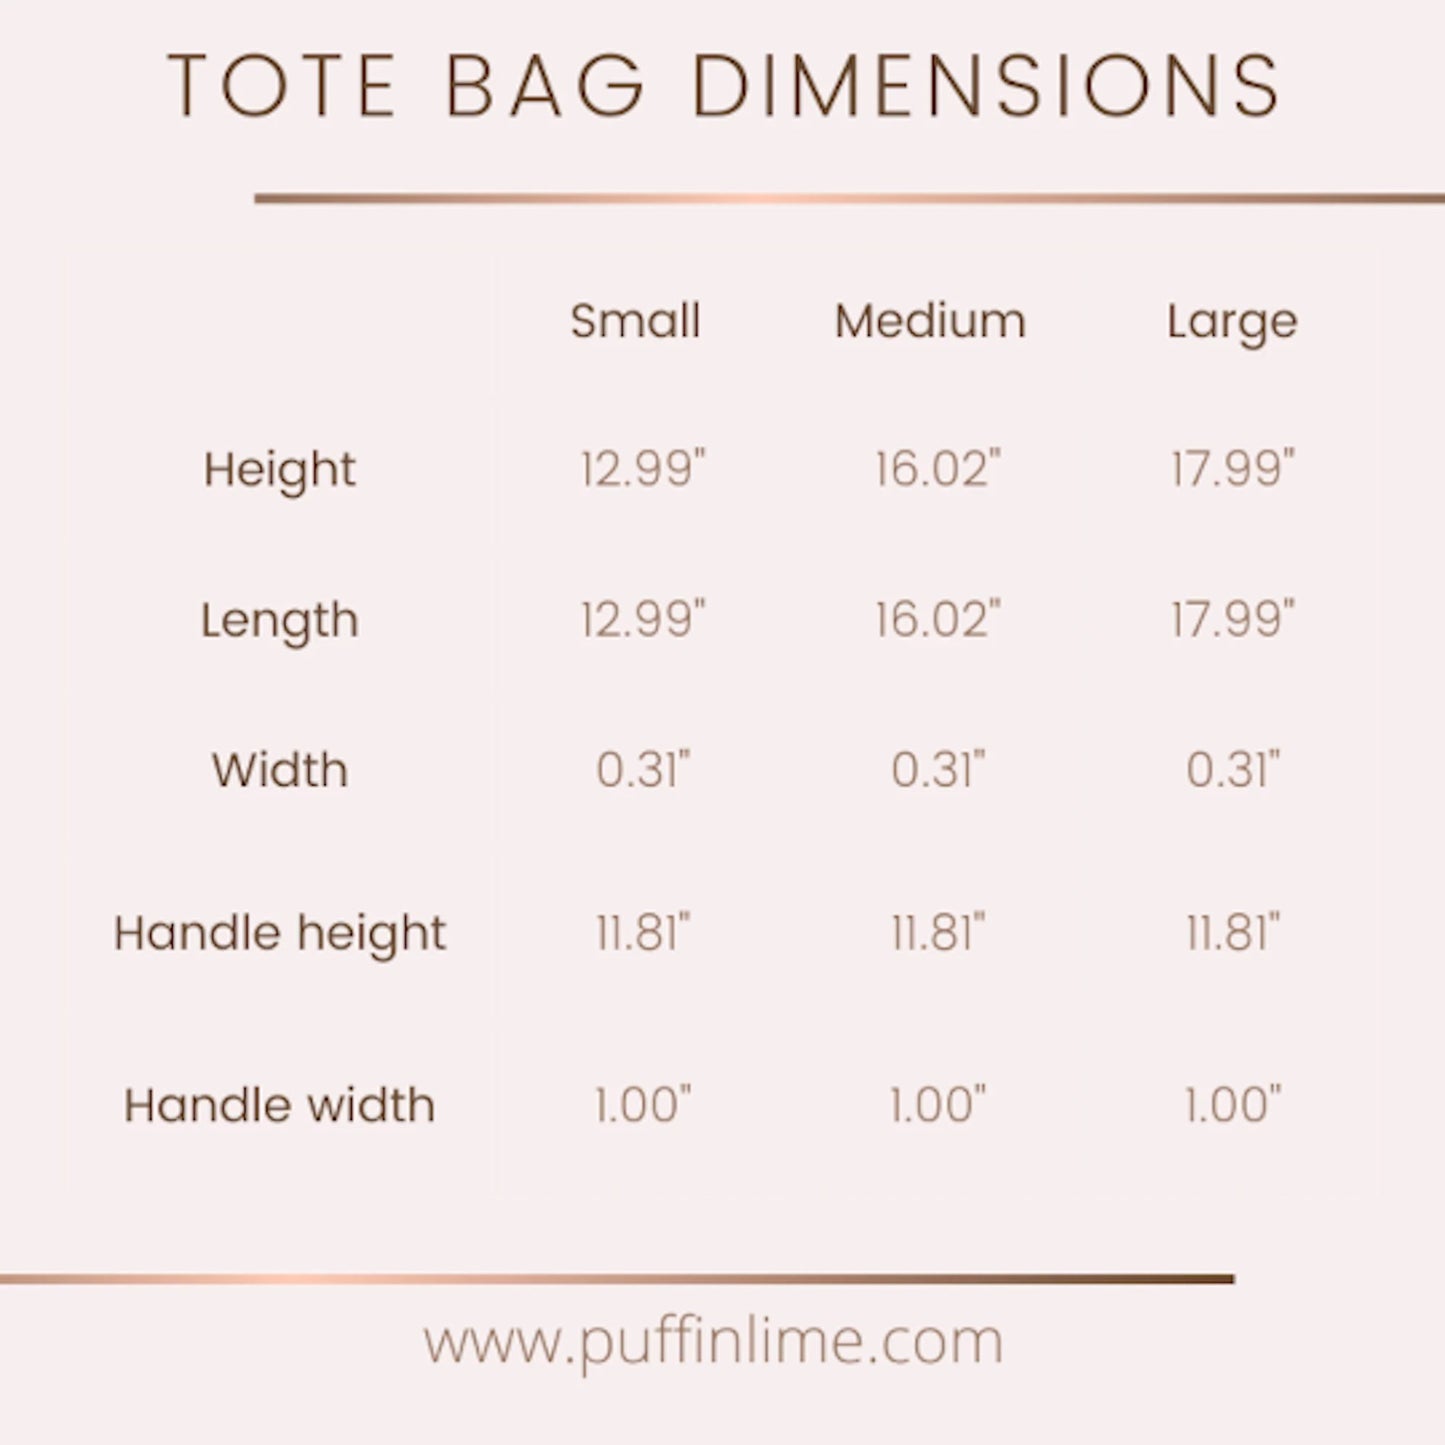 Teacher's Assistant Tote Bag - Puffin Lime